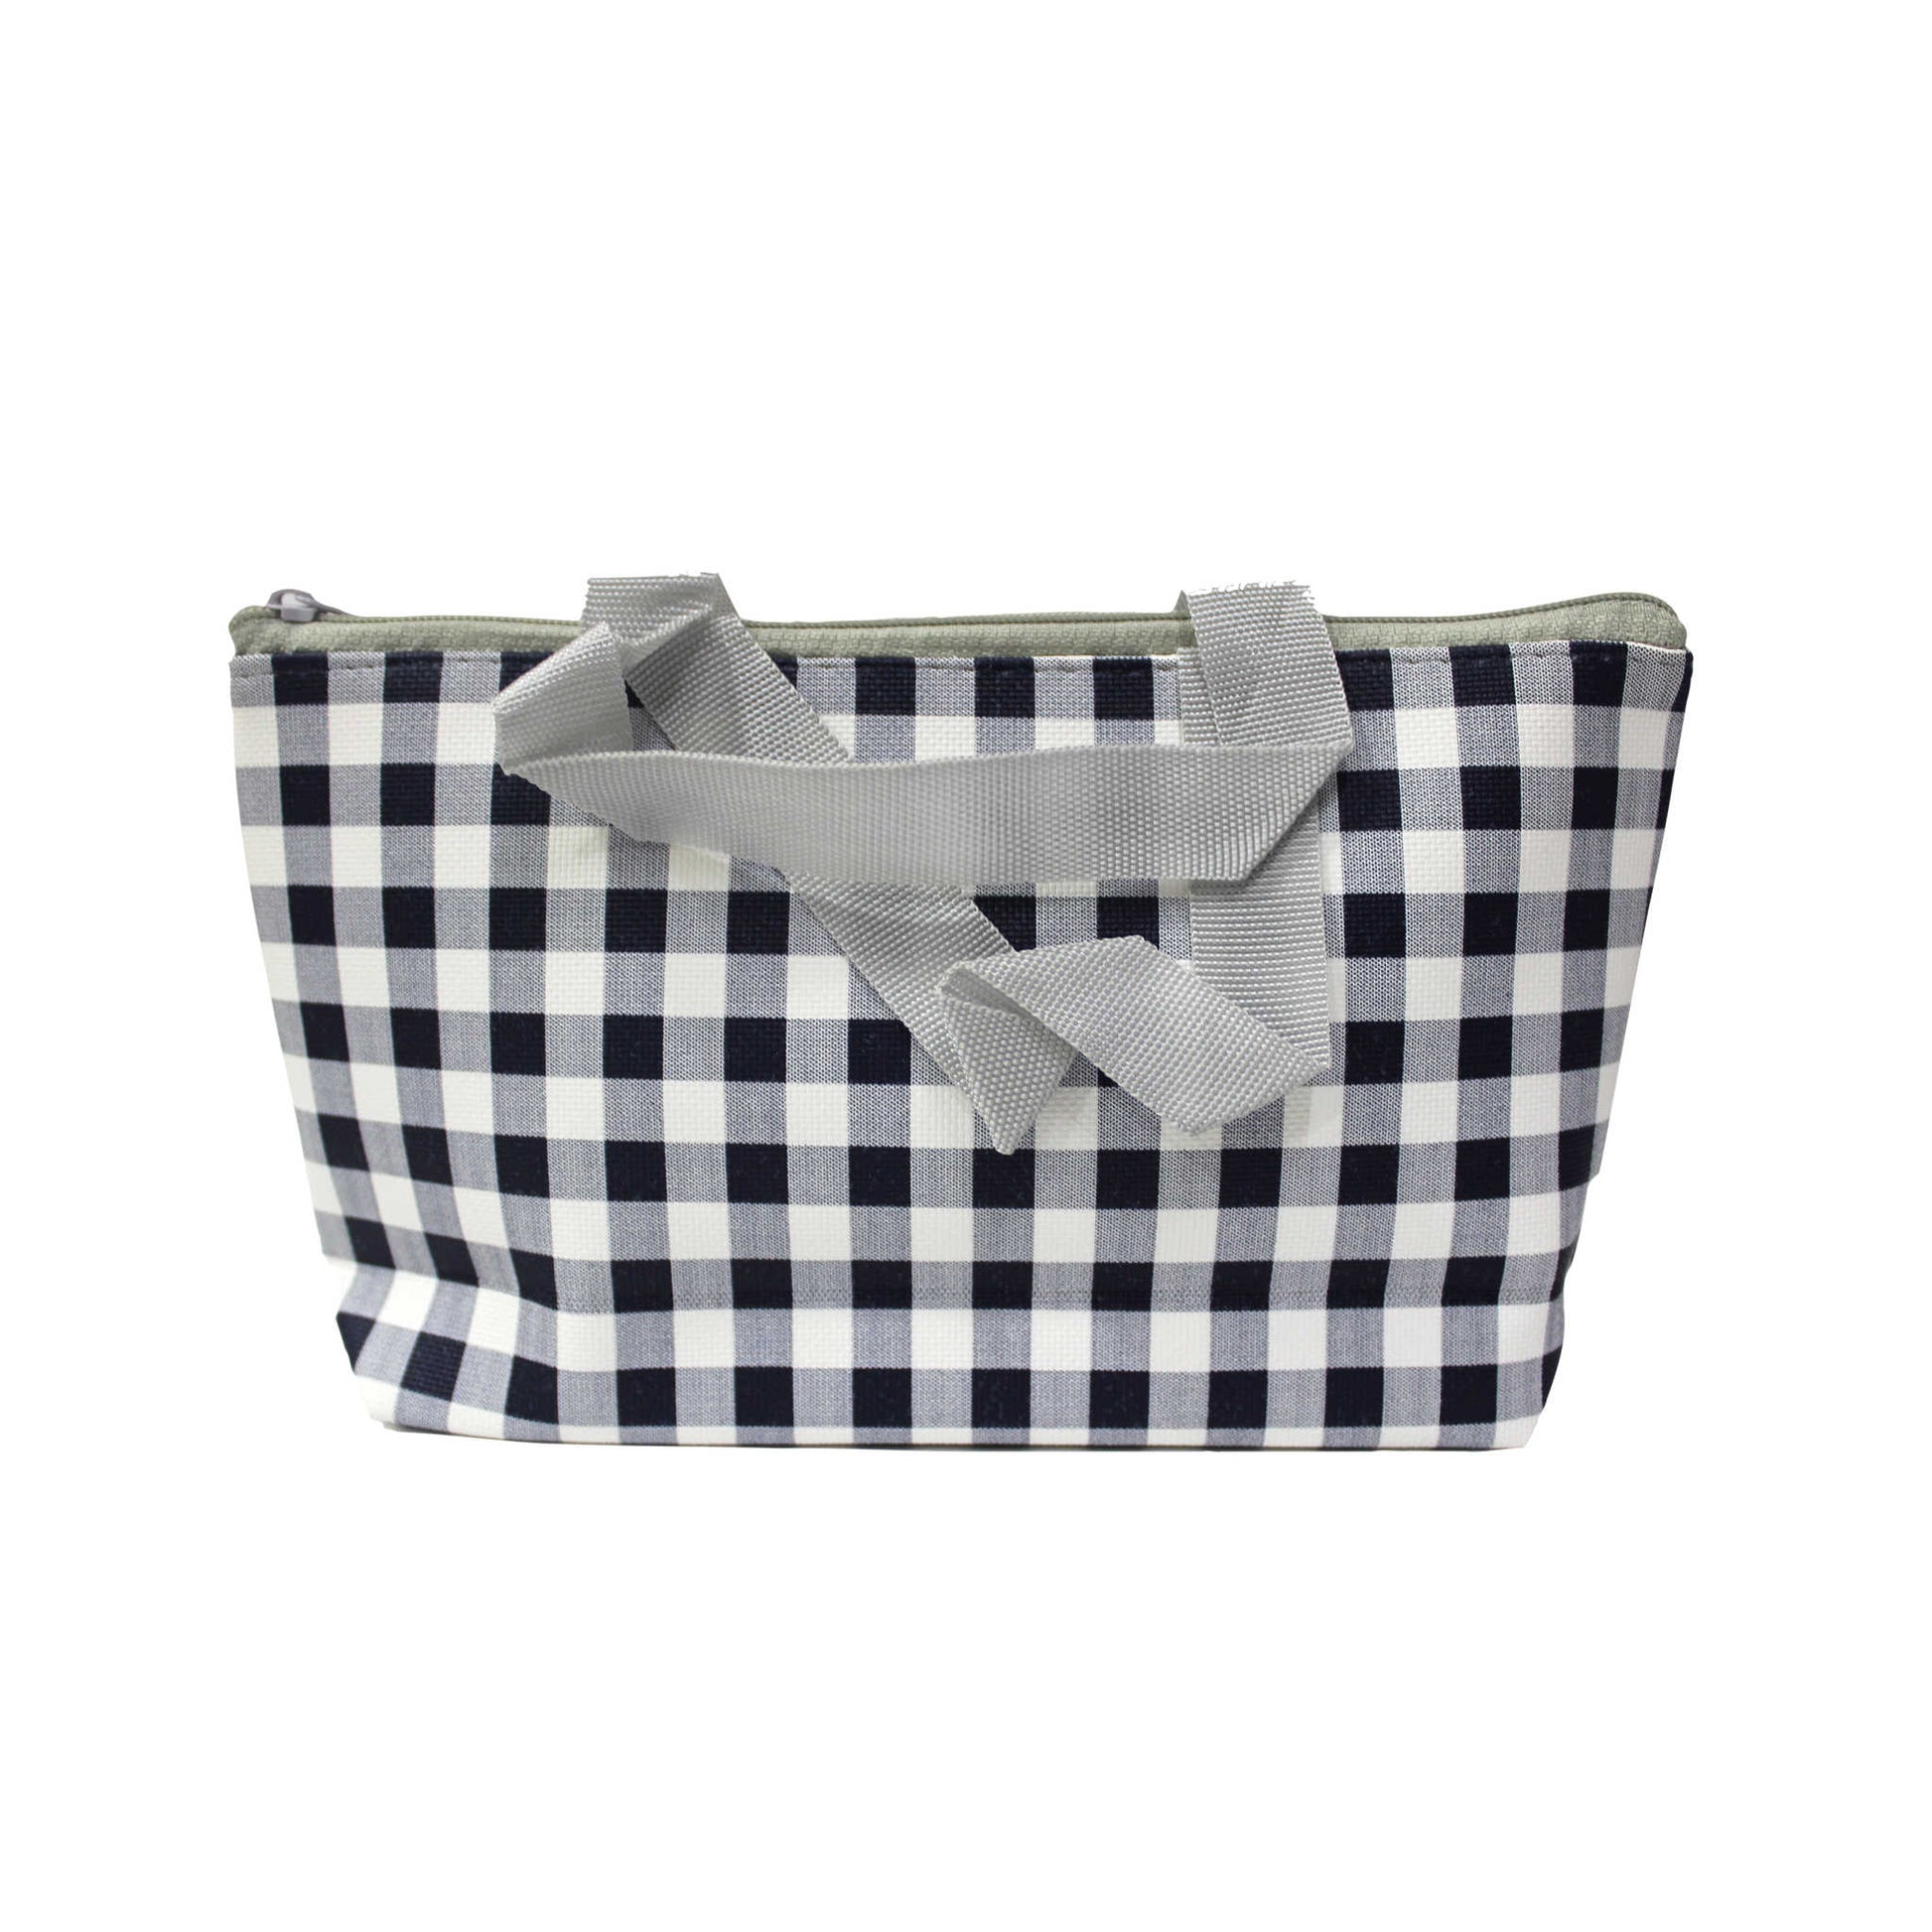 Indian Petals Imported Durable Canvas Printed multi purpose utility Small Bag with handles for all occasions for the girls and ladies, Checkered Theme